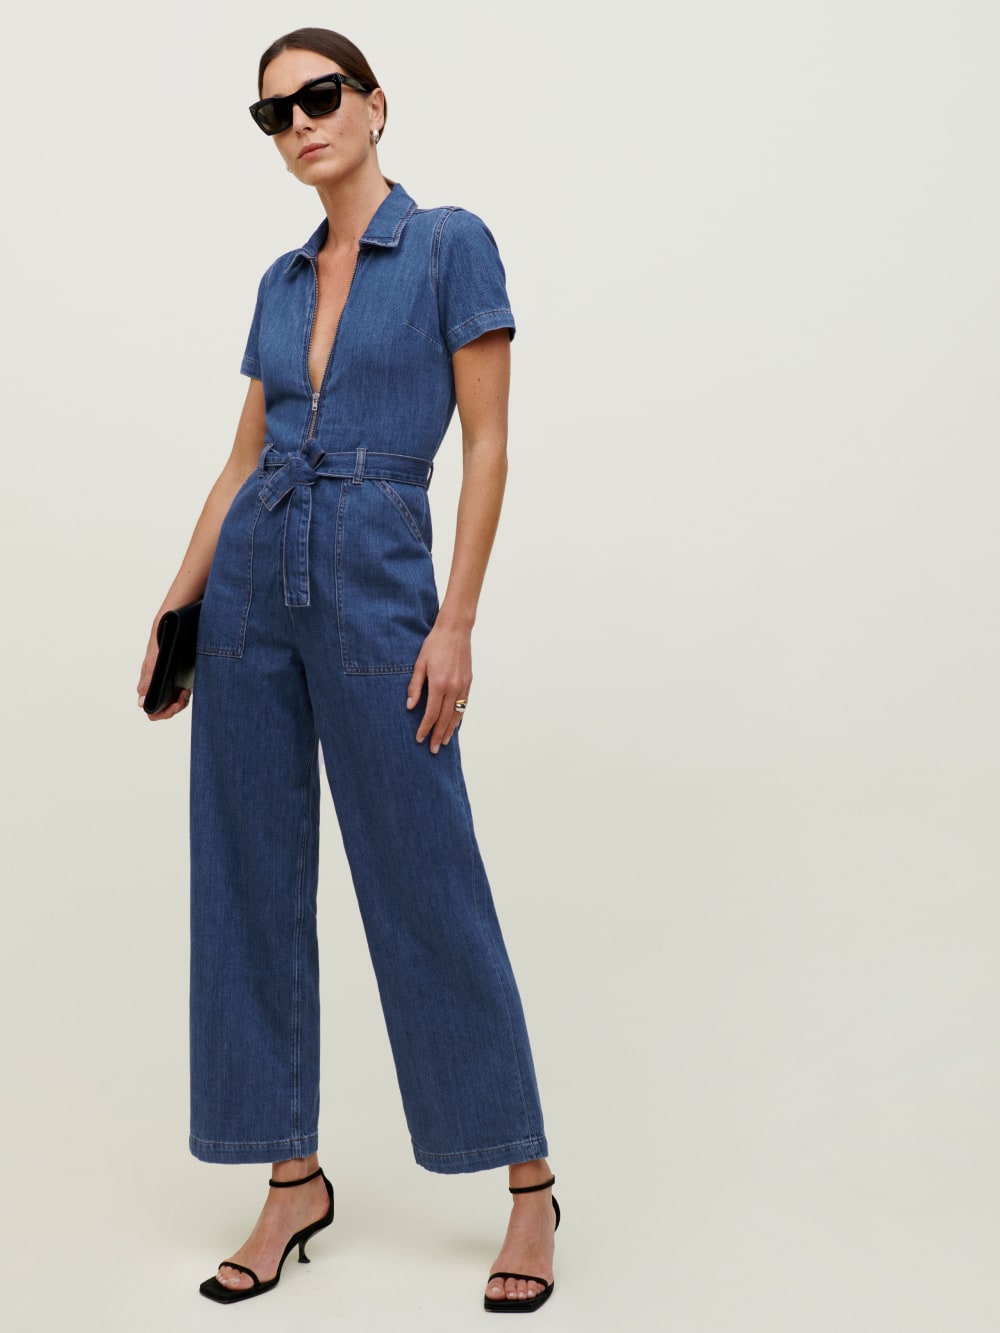 Denim full length, short sleeve jumpsuit with a deep v neckline. It features a functional, center front zipper and a self tie around the waist so you can adjust to your liking.